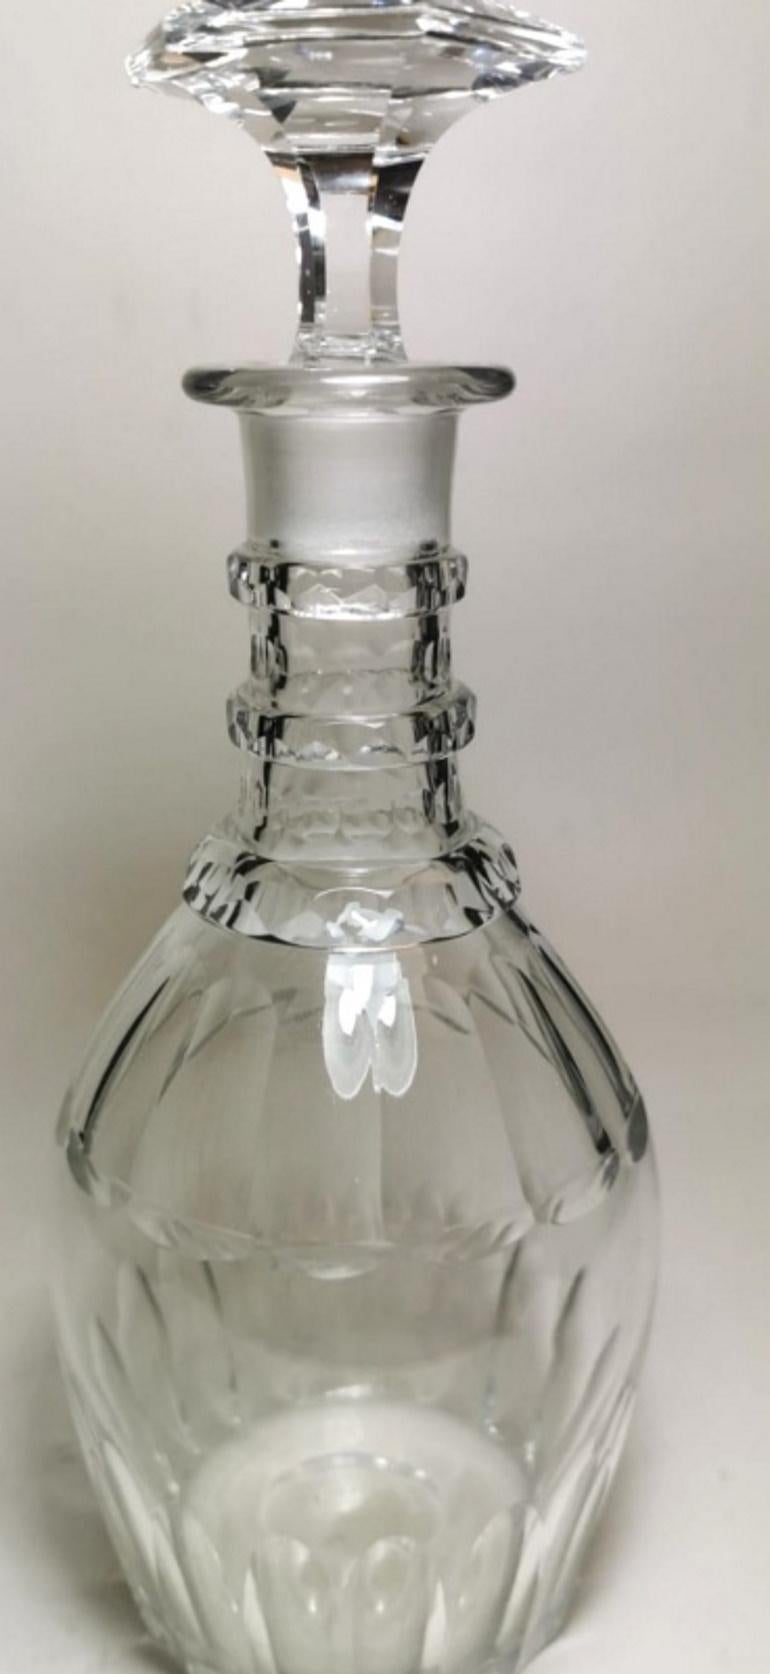 Beautiful and elegant decanter bottle; it was made in England between 1820 and 1824 during the reign of George IV; the crystal was completely cut and ground by hand by a skilled master craftsman with a Classic design, simple and linear but of high